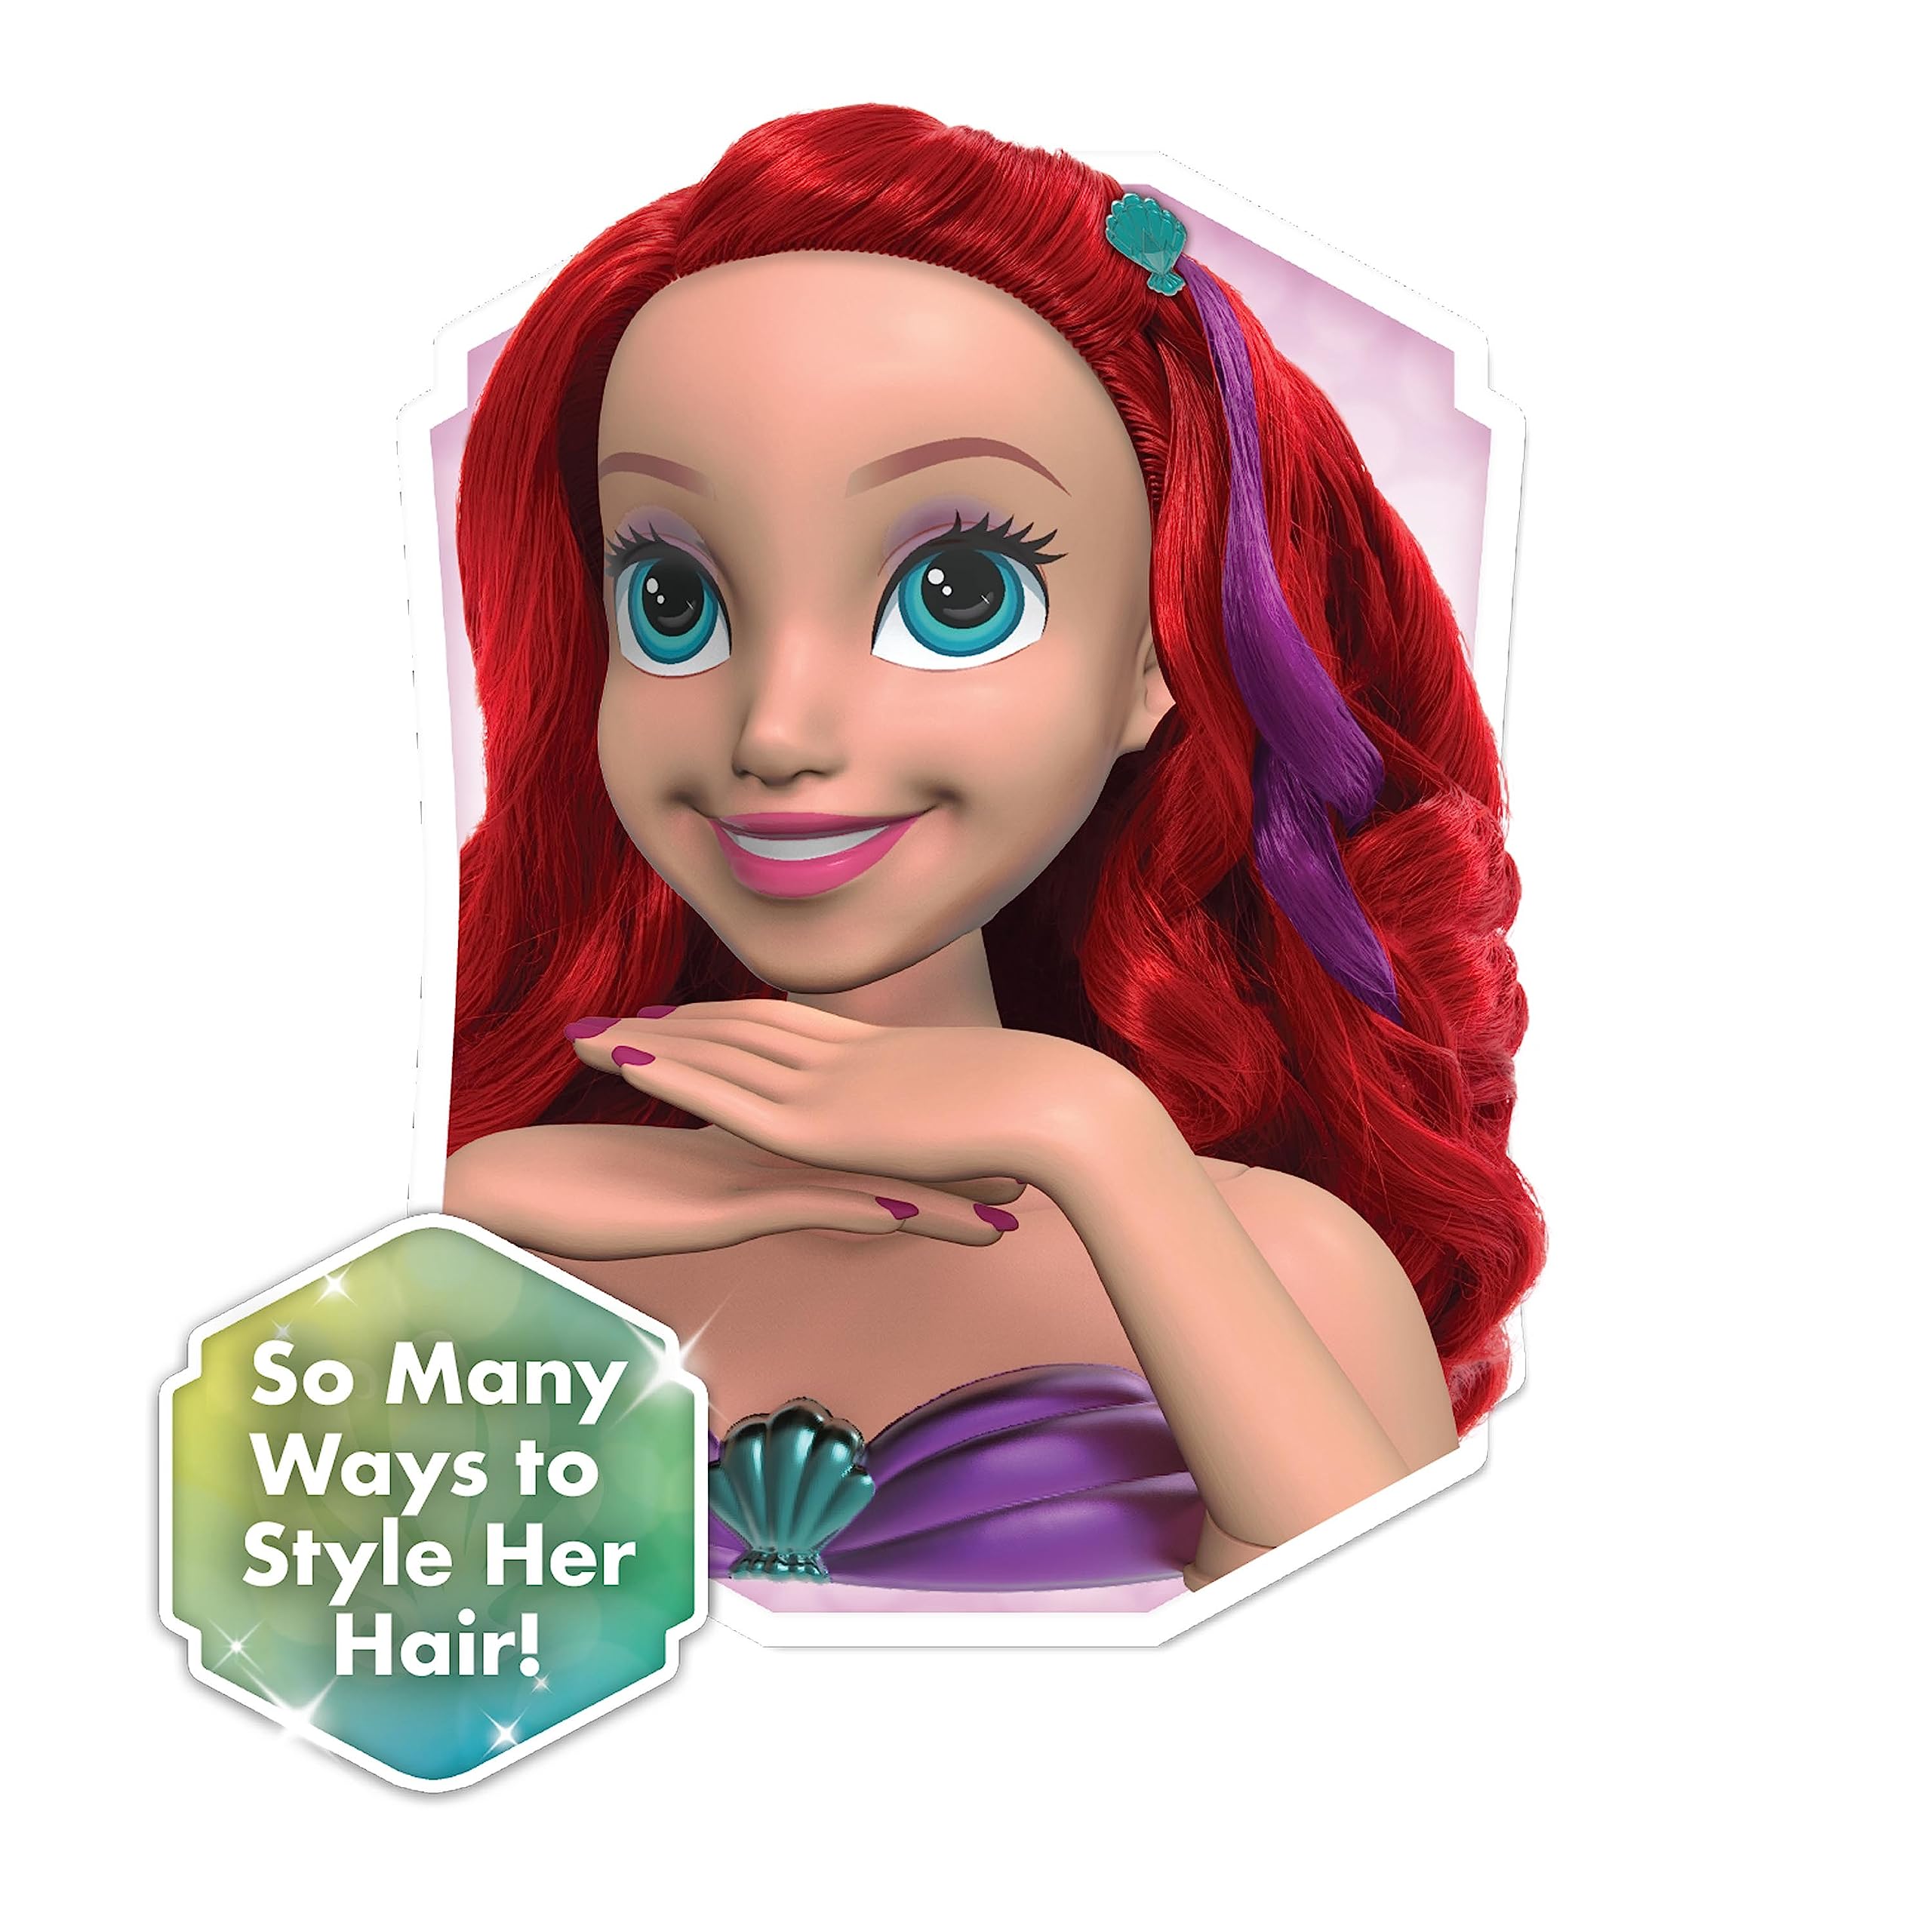 Disney Princess Shimmer Spa Ariel 8-inch Styling Head, 20-Pieces, Red Hair, Pretend Play, Officially Licensed Kids Toys for Ages 3 Up by Just Play